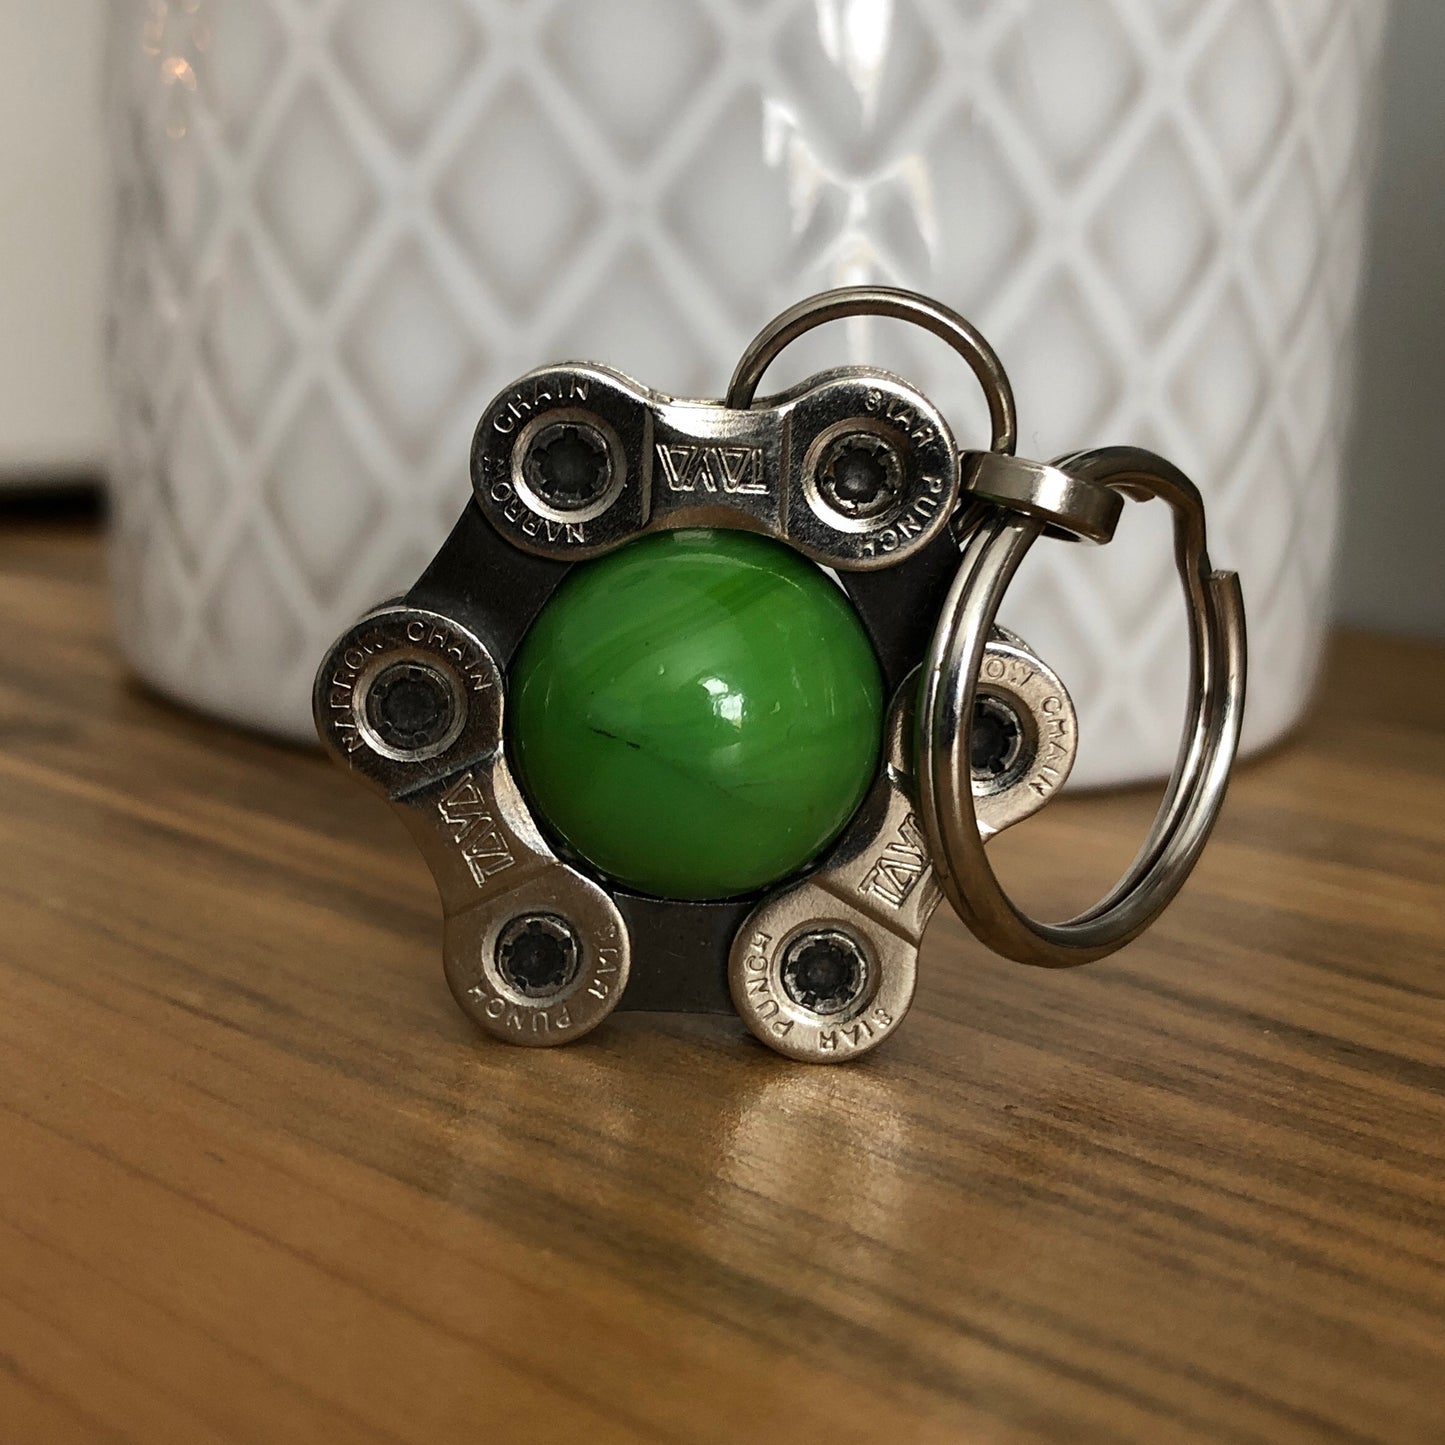 Recycled Bicycle Chain Key Chain: Chrysoprase with Silver Link